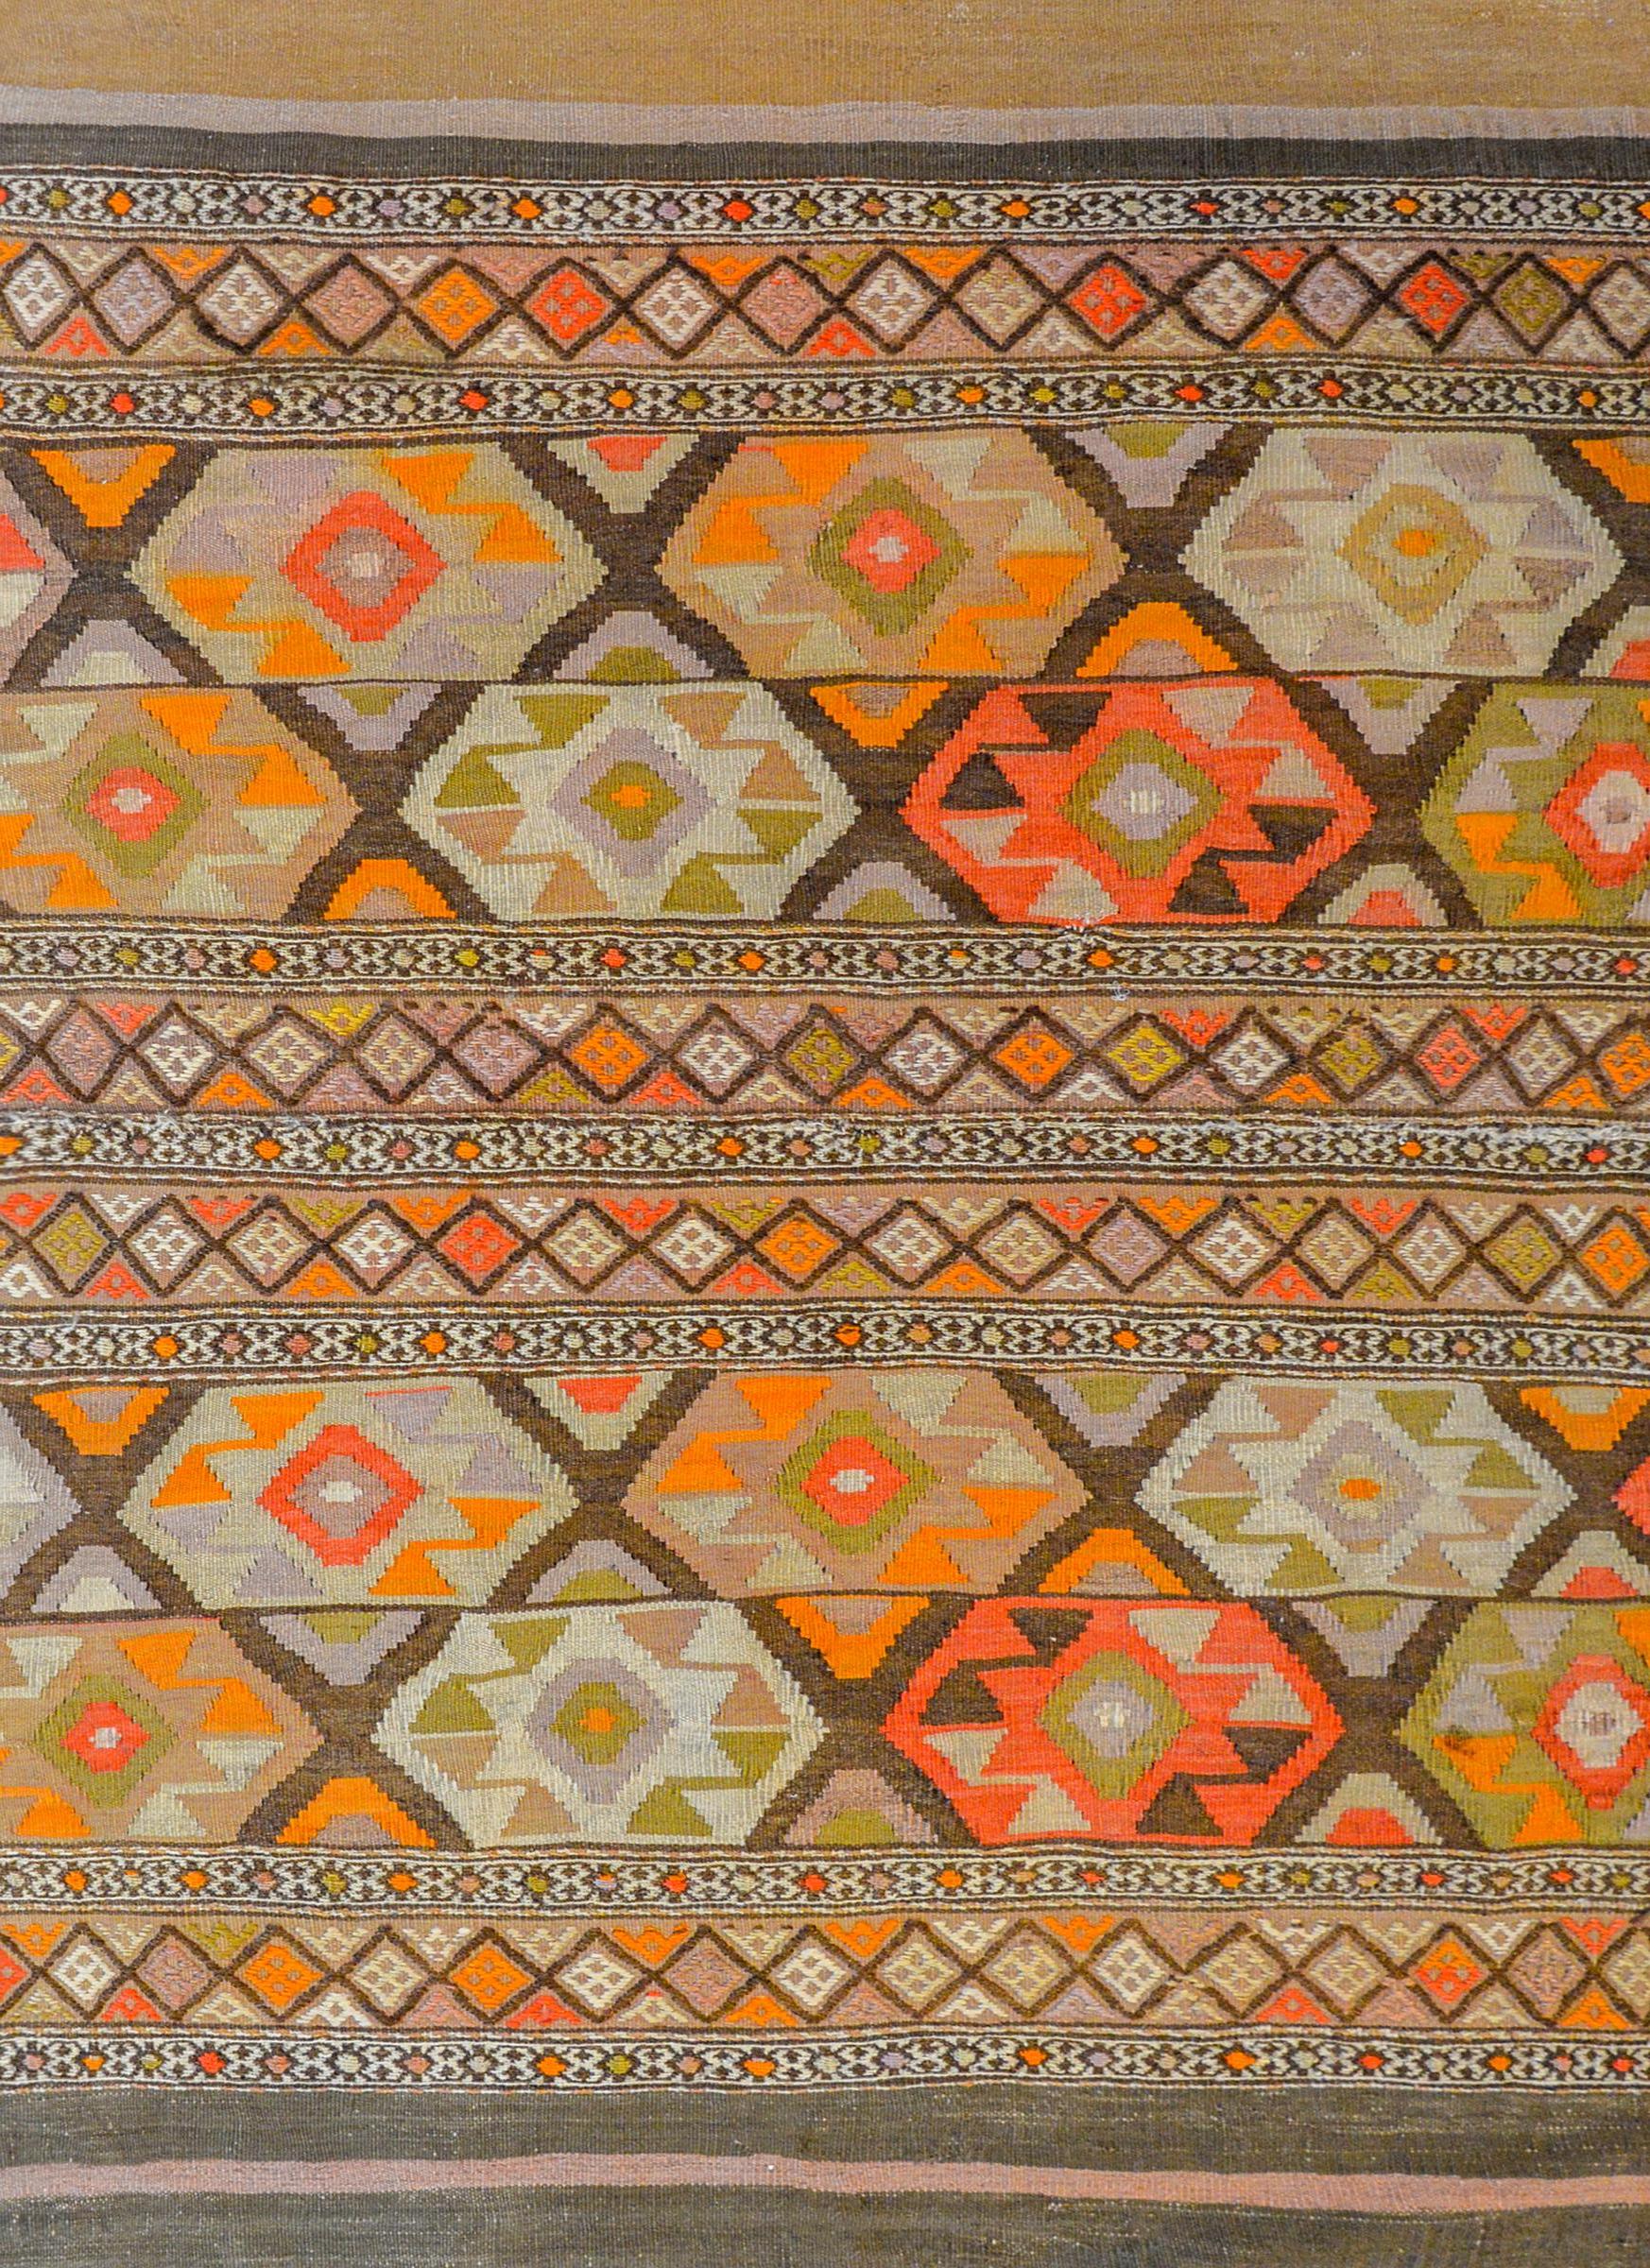 A beautiful early 20th century Persian Shahsevan Kilim rug with a wonderful bold geometric pattern of stylized flowers woven in coral, orange, green, white and brown vegetable dyed wool with thinner strips of hand-embroidered trellis and geometric